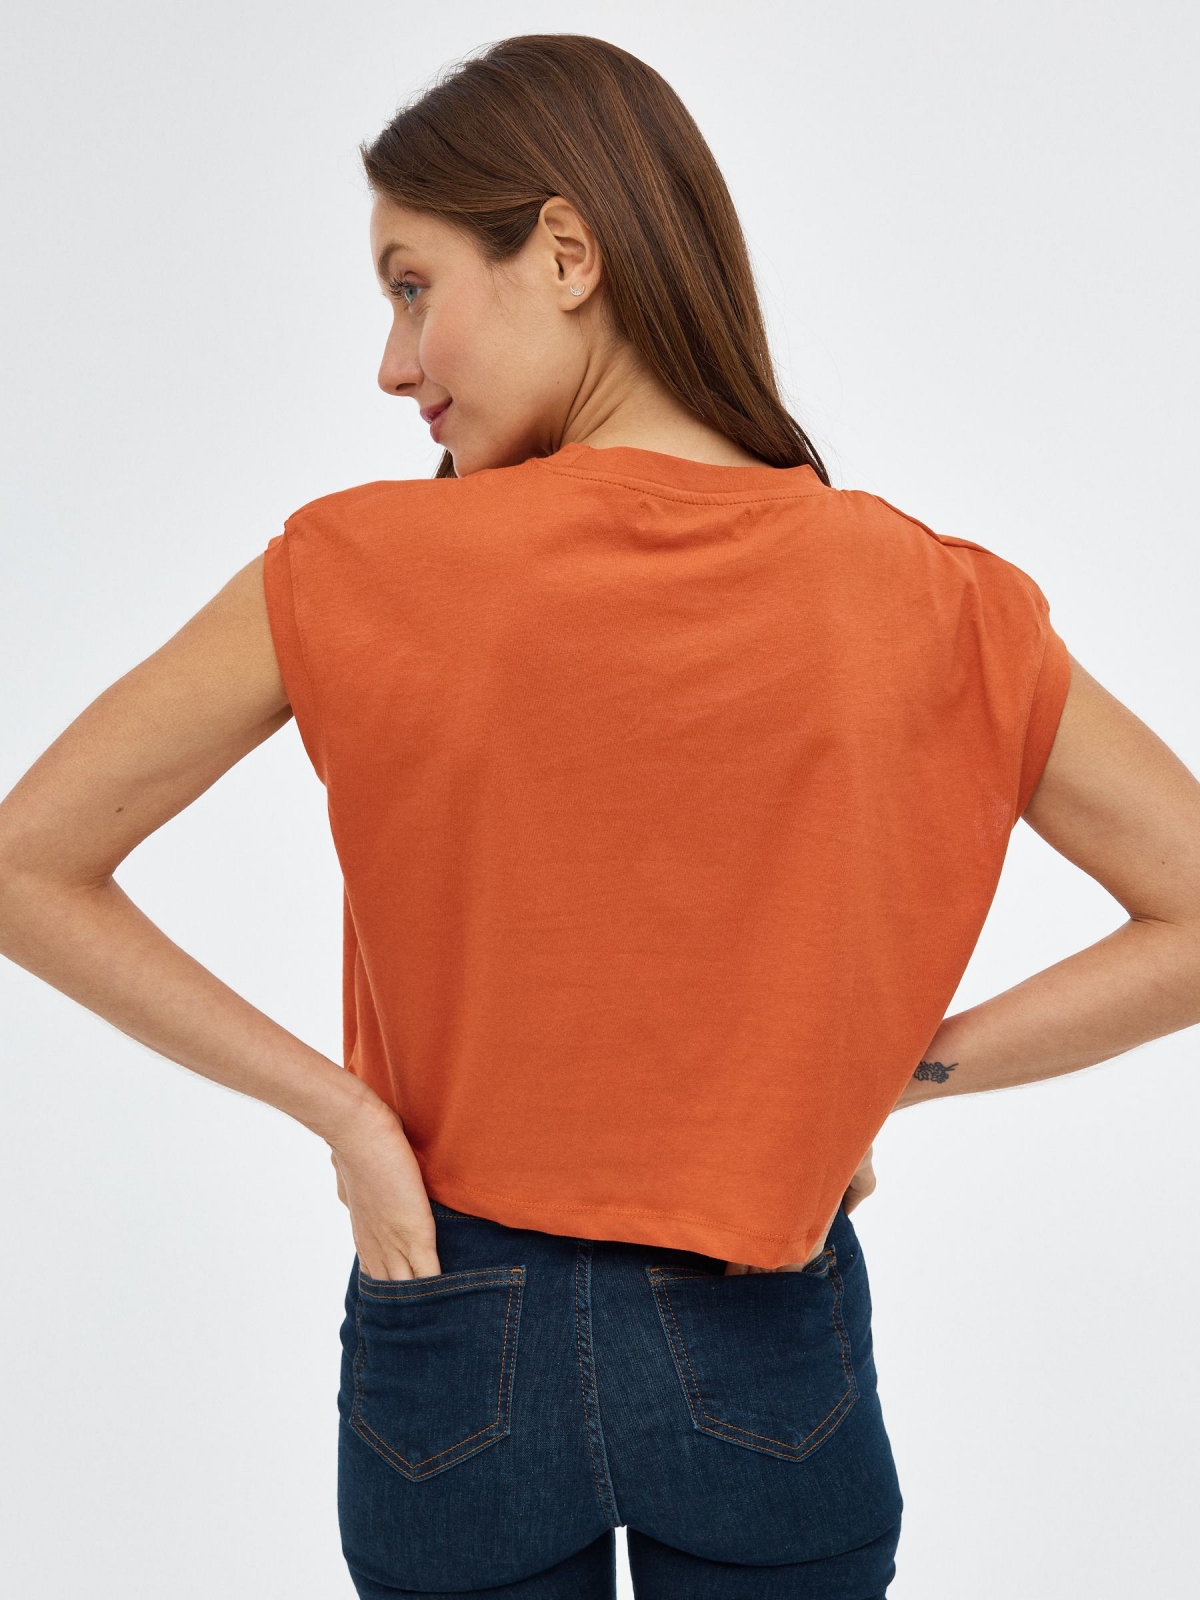 Orange graphic T-shirt brick red middle back view